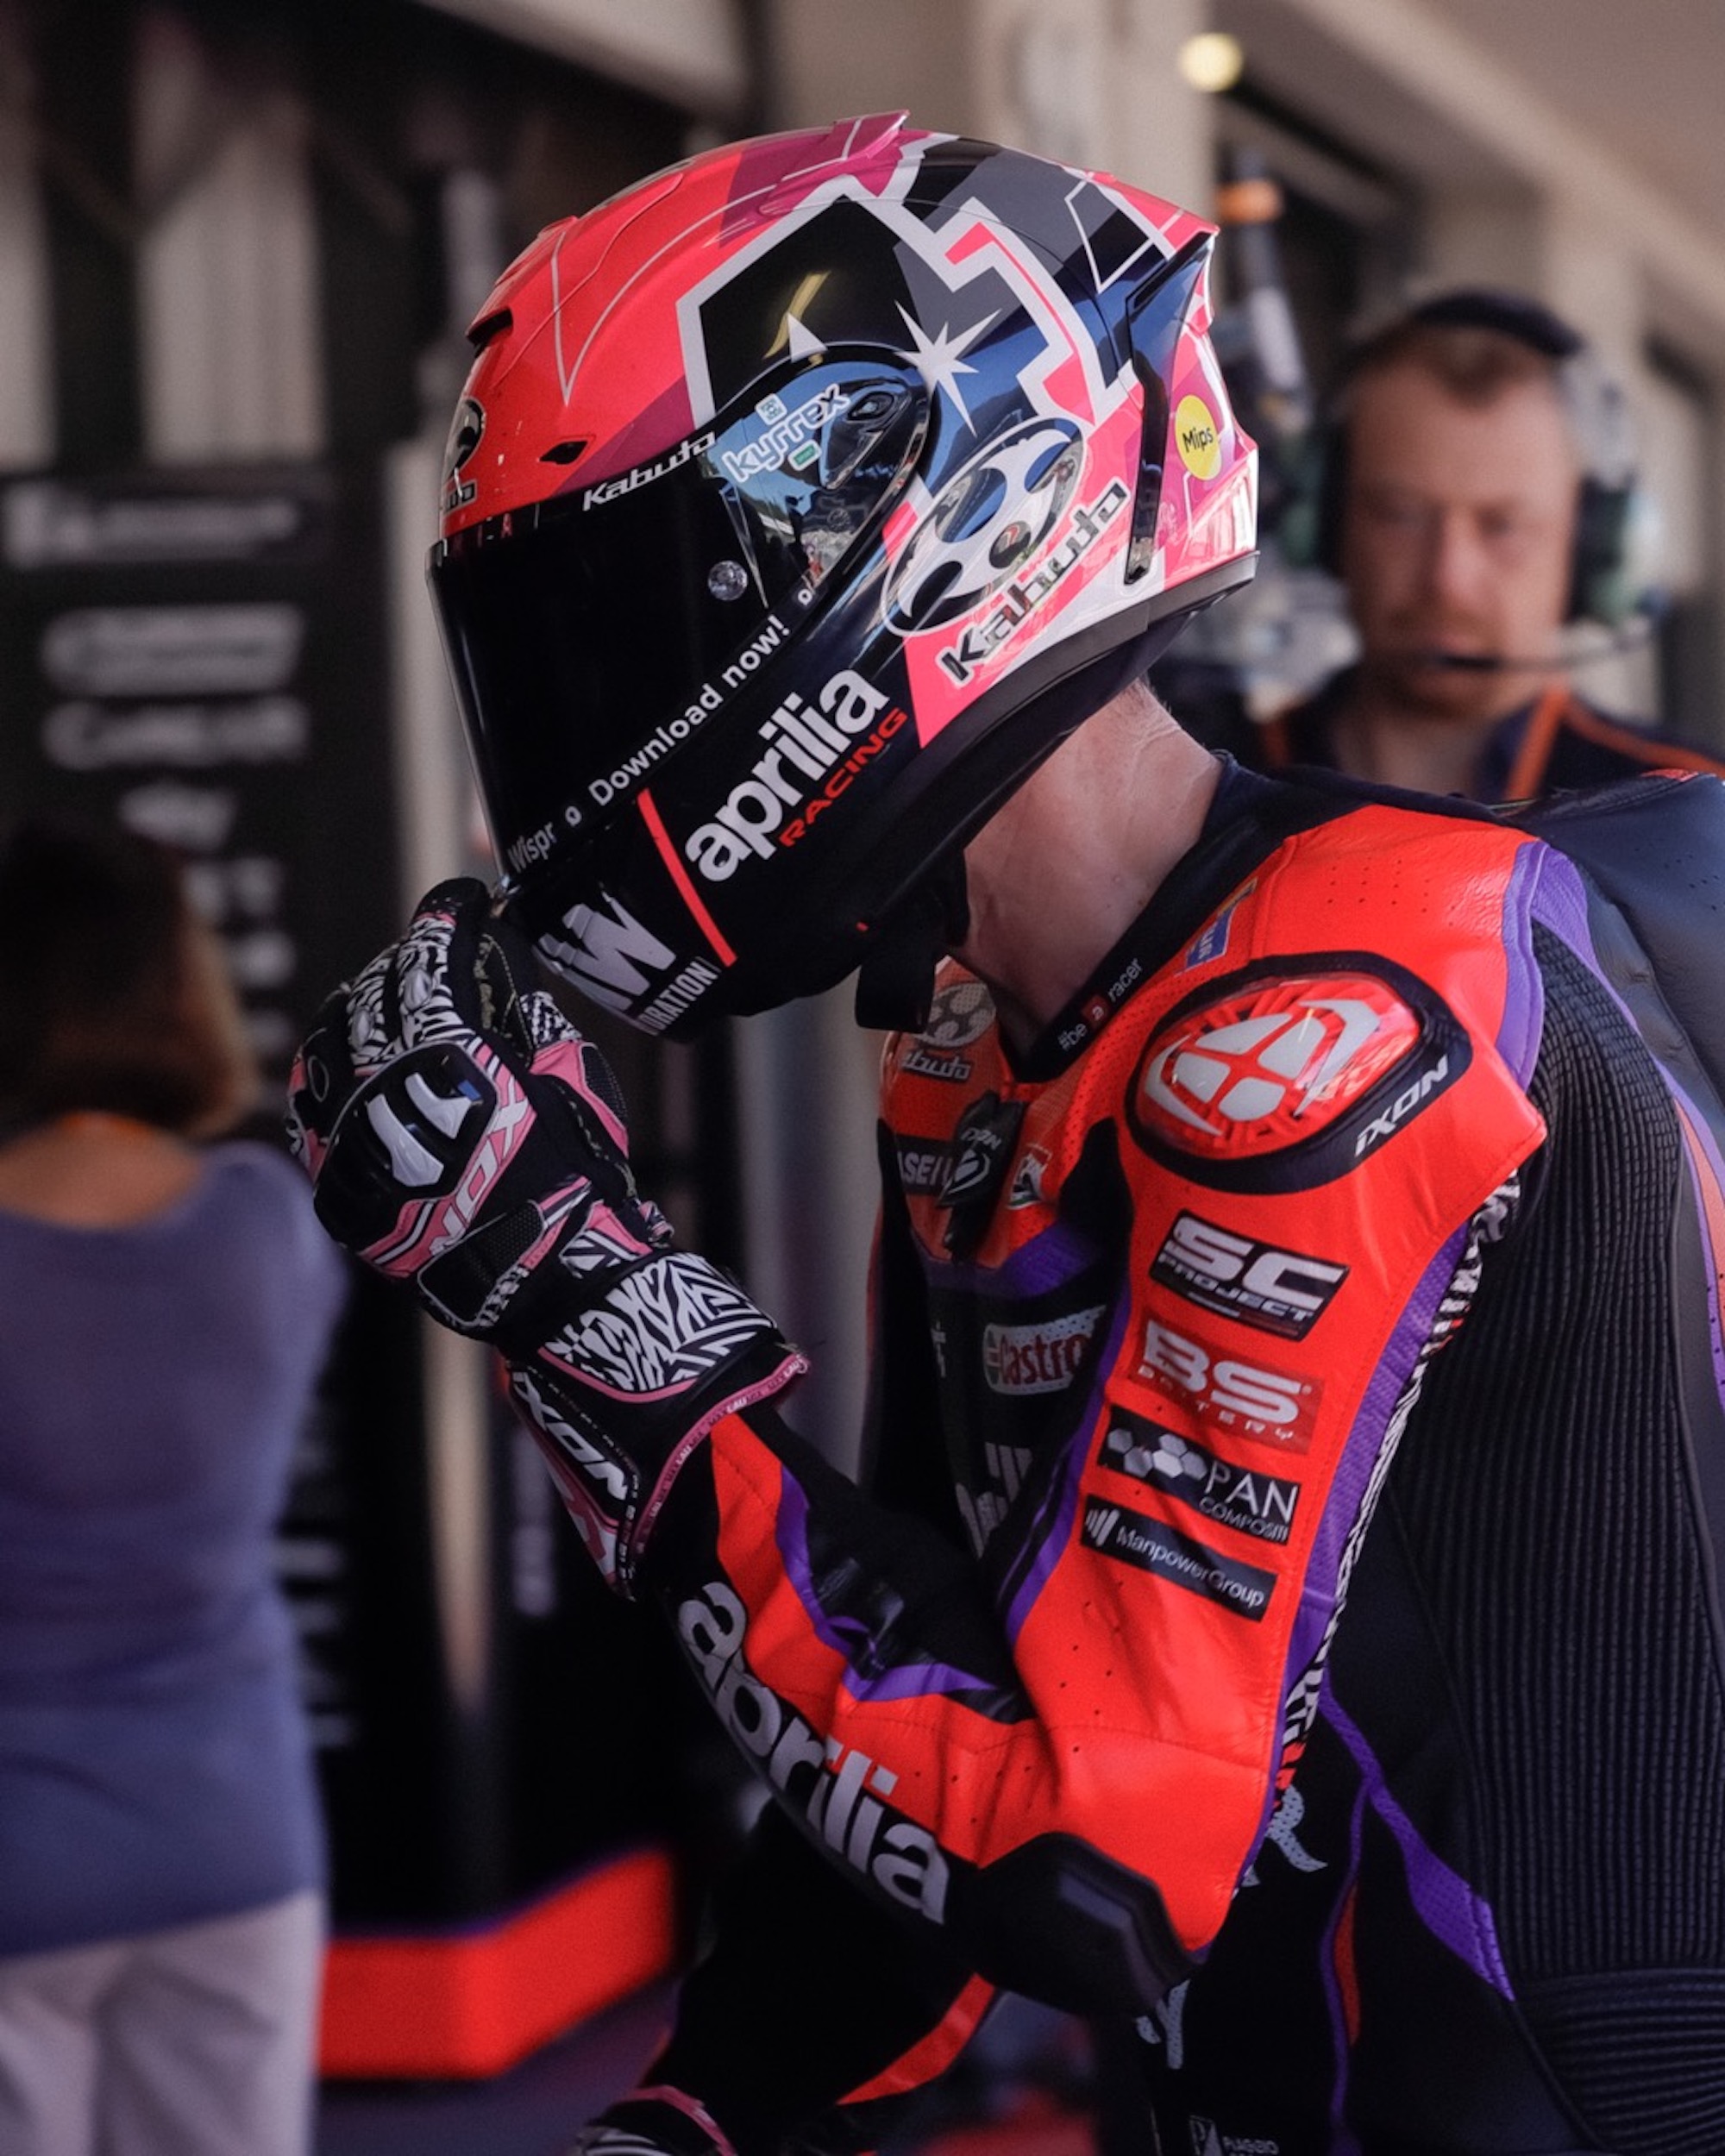 Aleix Espargaró, prepping for the asphalt with the new Kabuto’s F17 Racing Mips helmet. Media courtesy of Kabuto and sourced from Mips' press release.